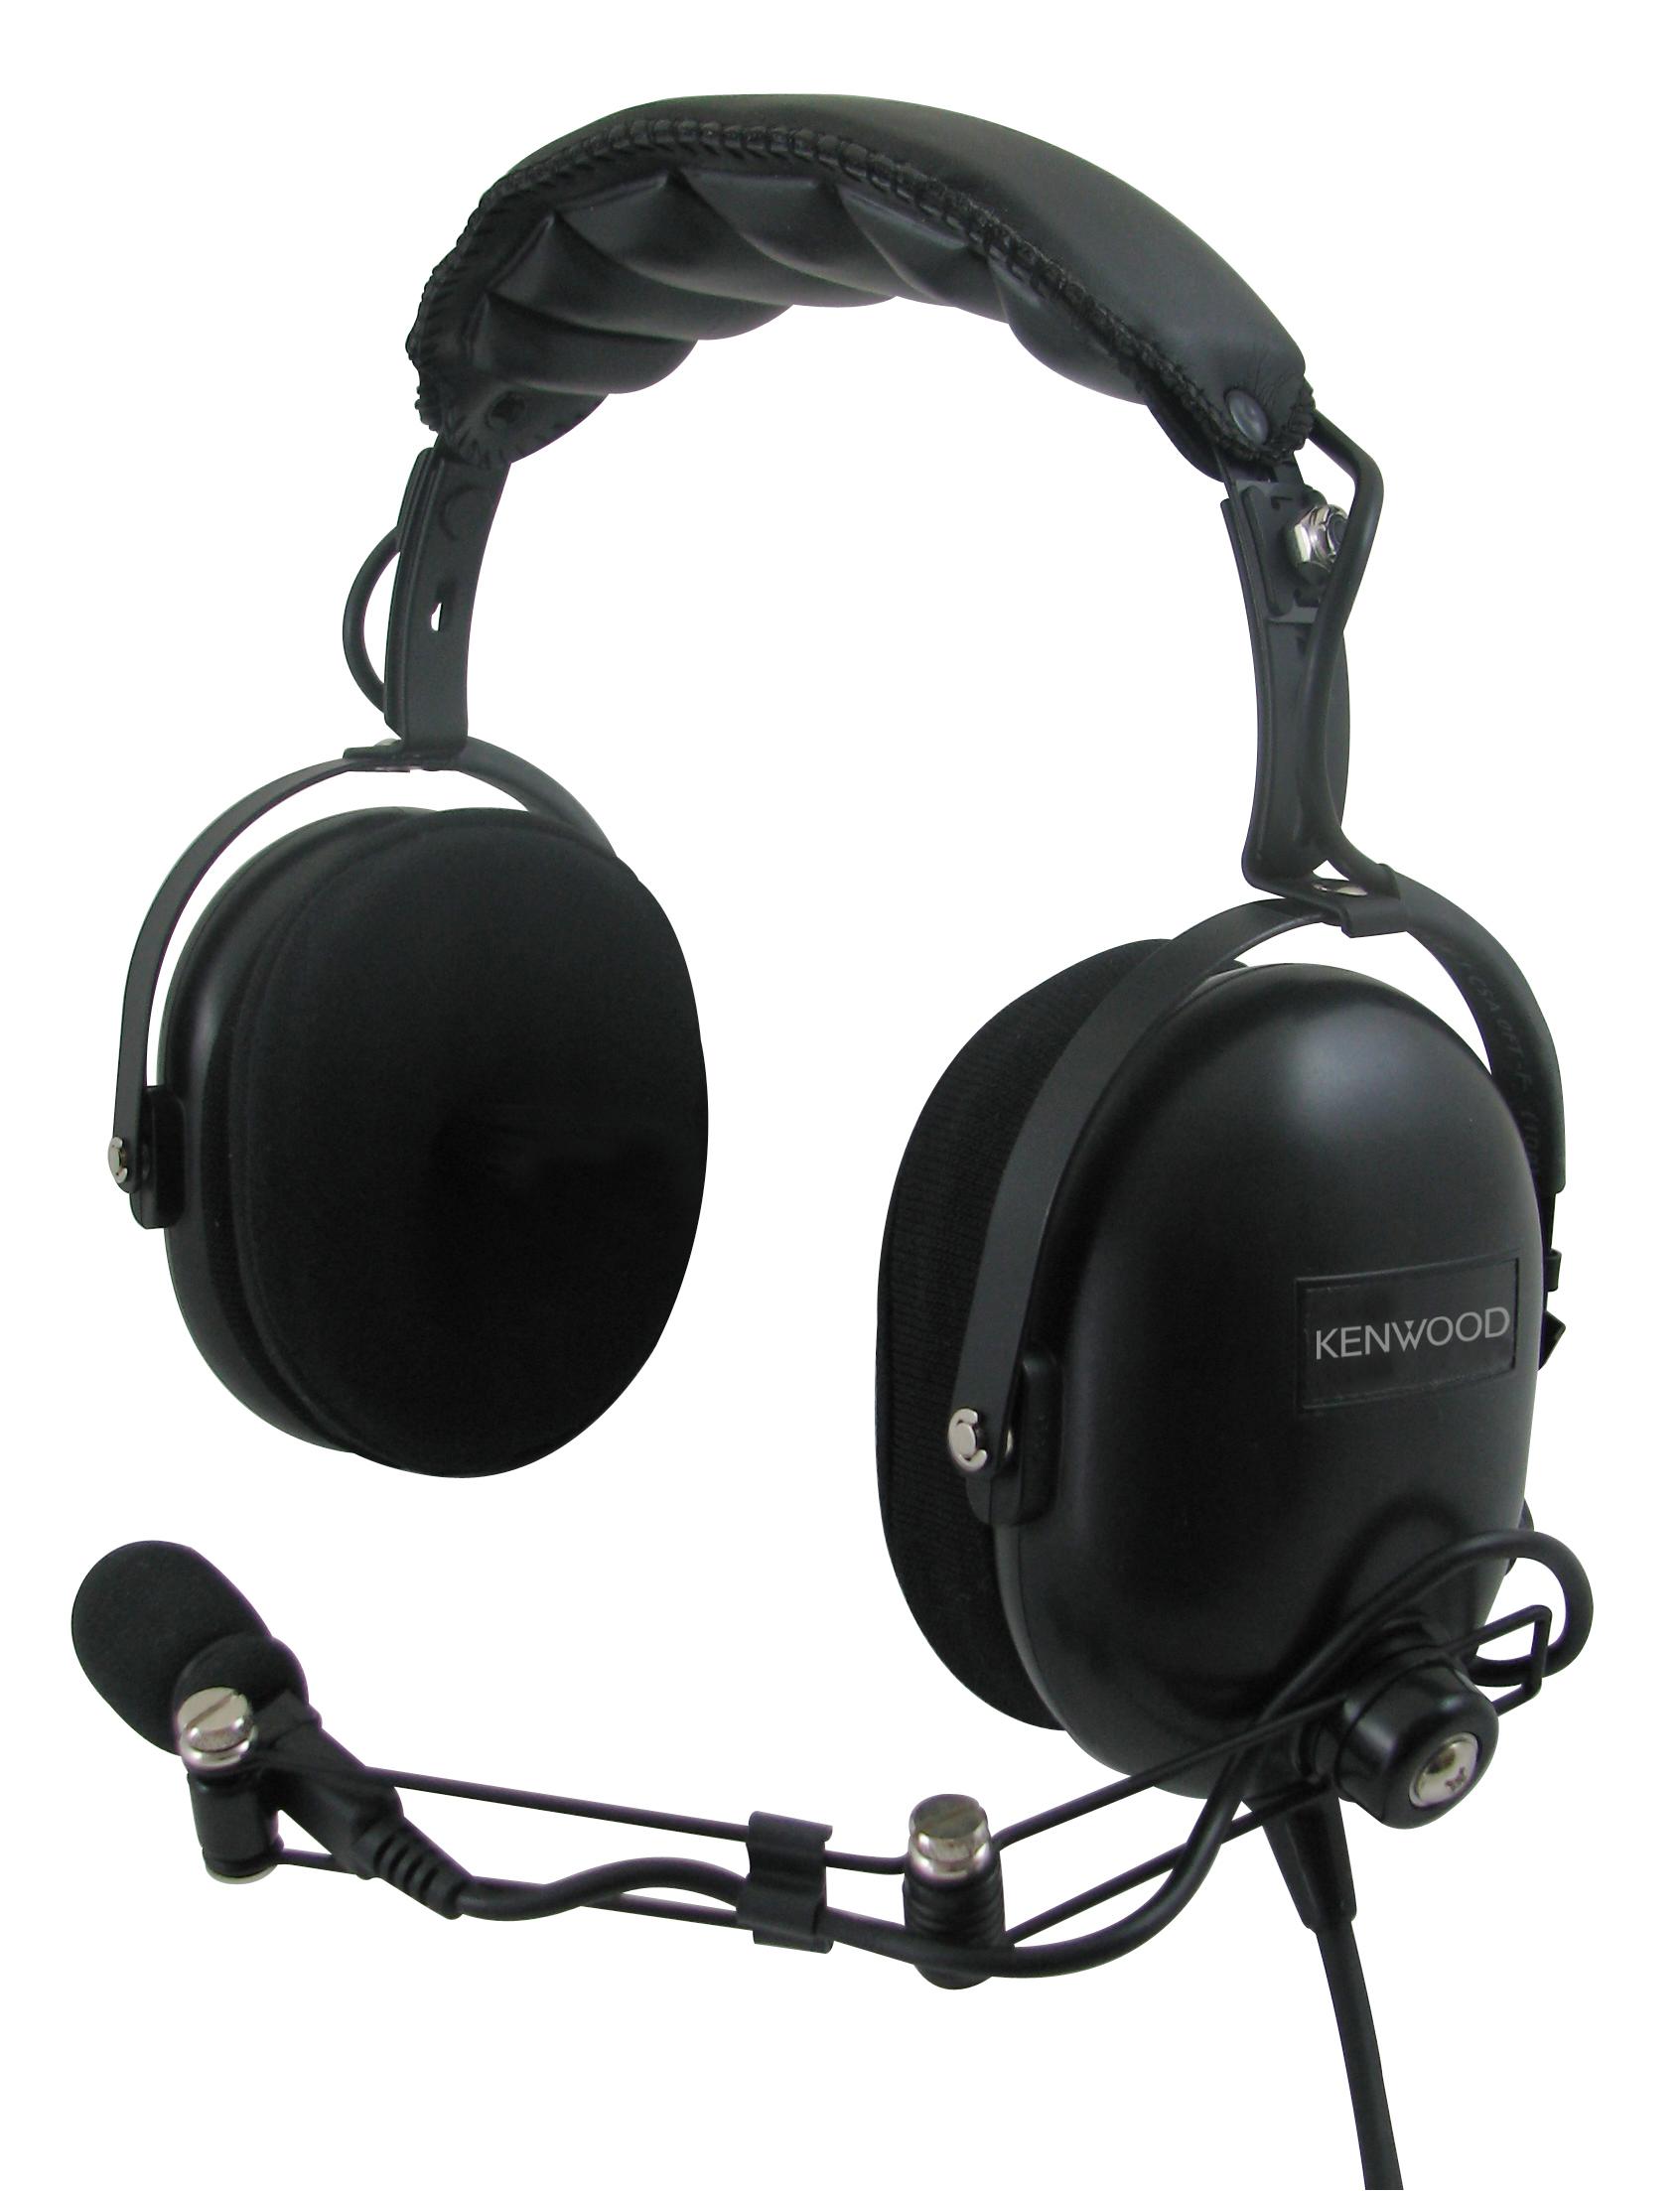 Kenwood khs-10-oh noise cancelling headset with boom microphone